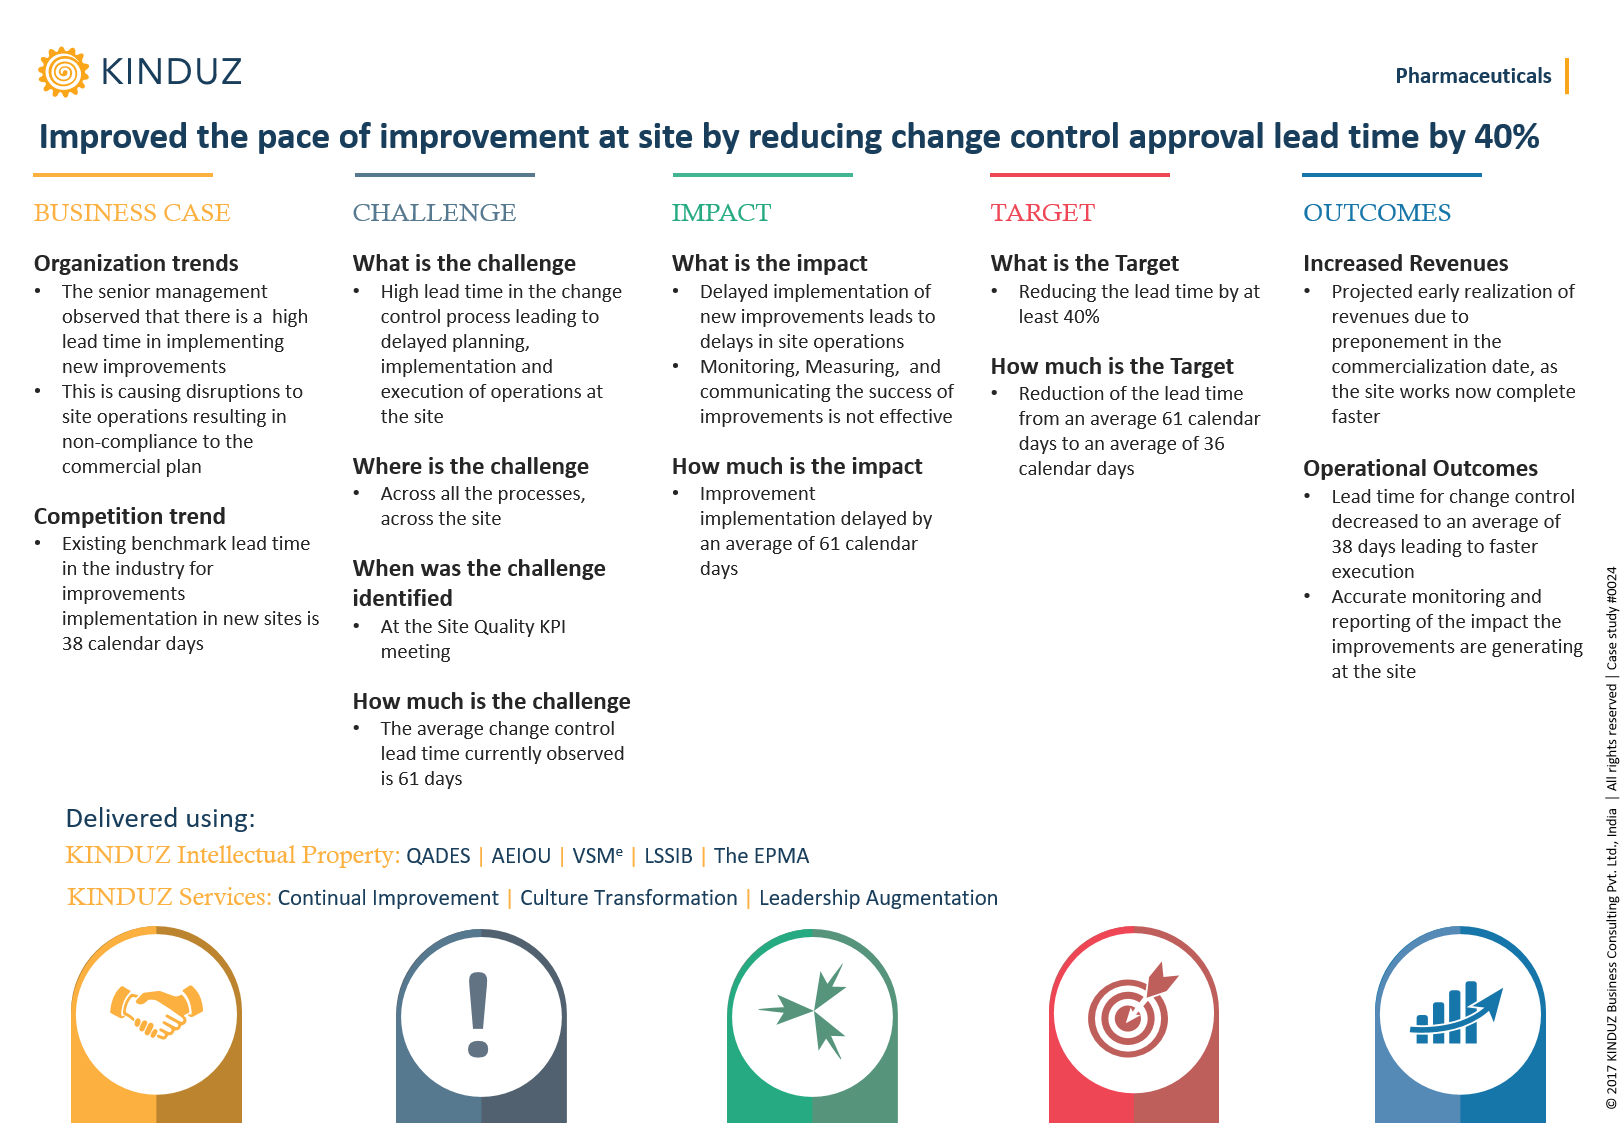 improved-the-pace-of-improvement-at-site-by-reducing-change-control-approval-lead-time-by-40